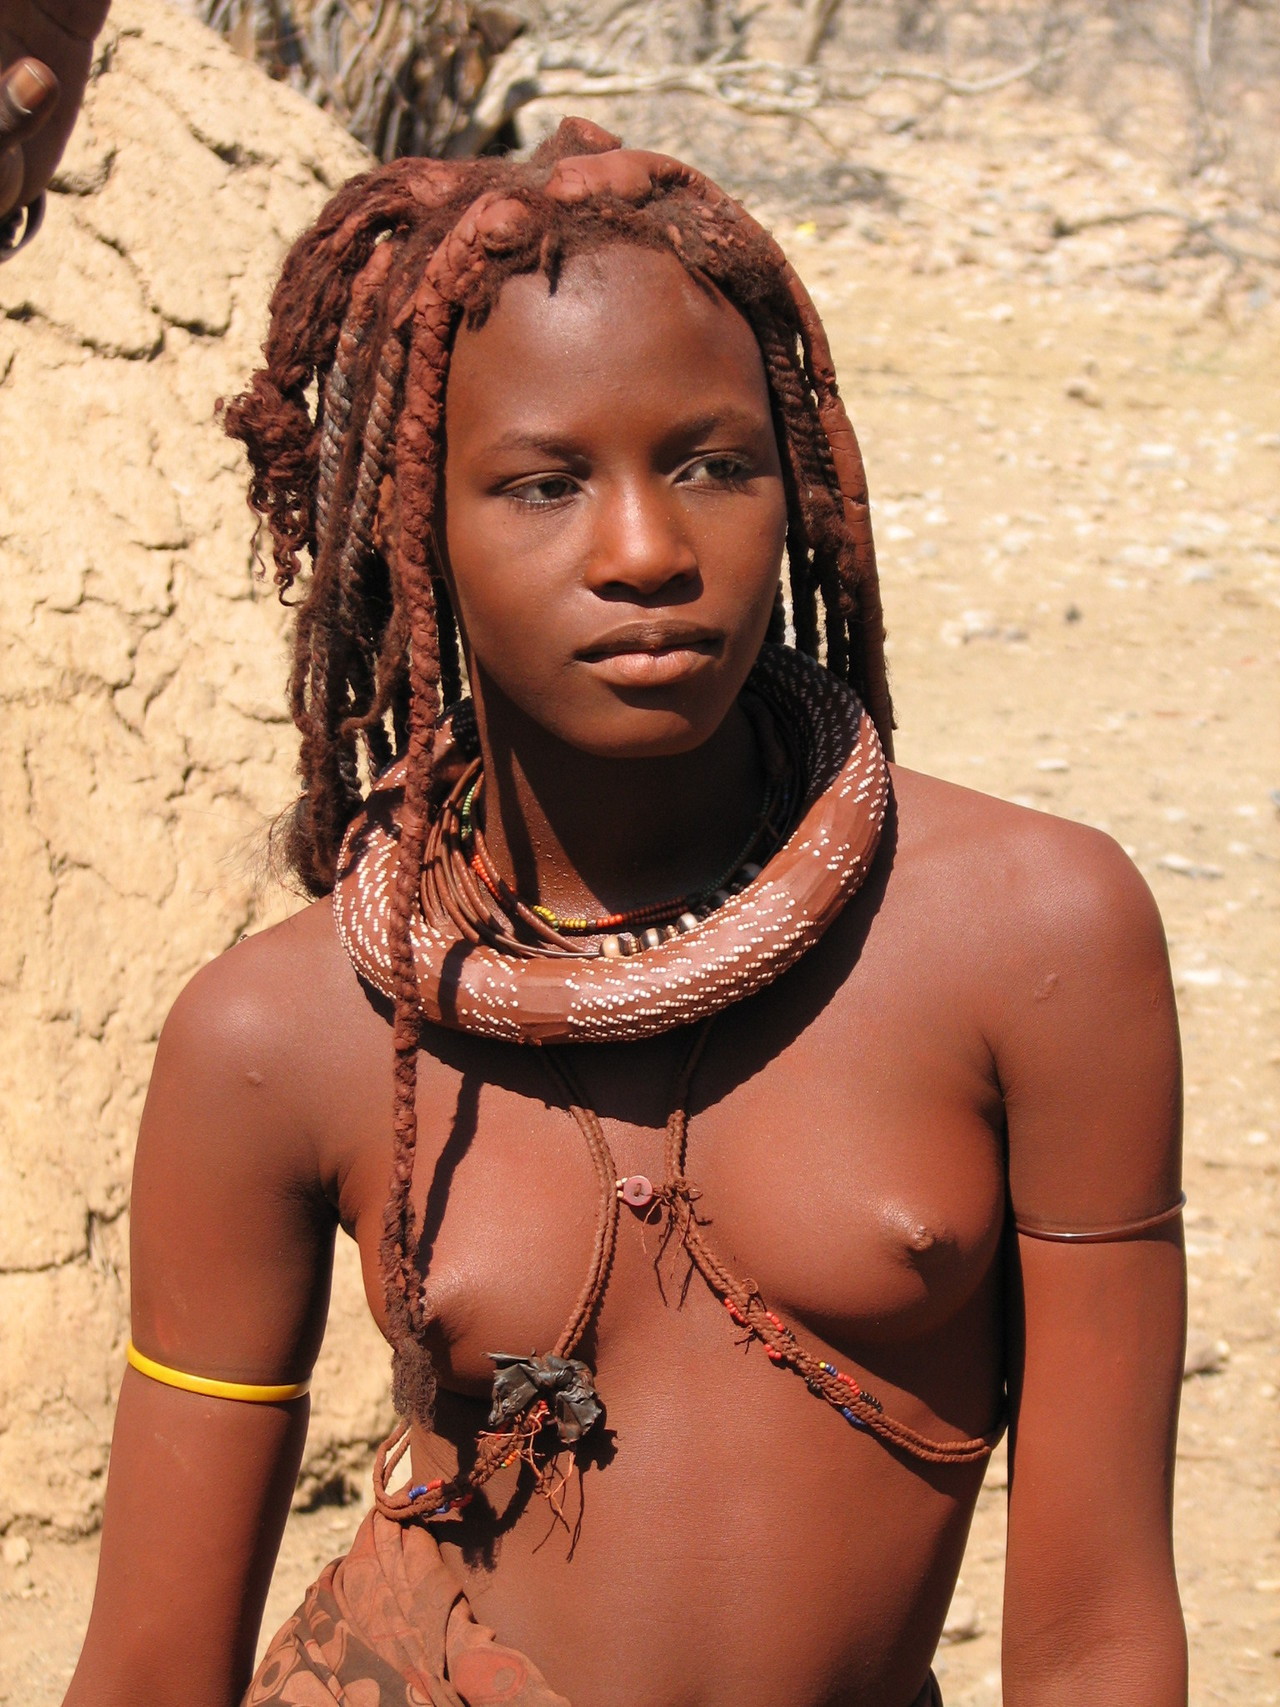 African tribe women tits